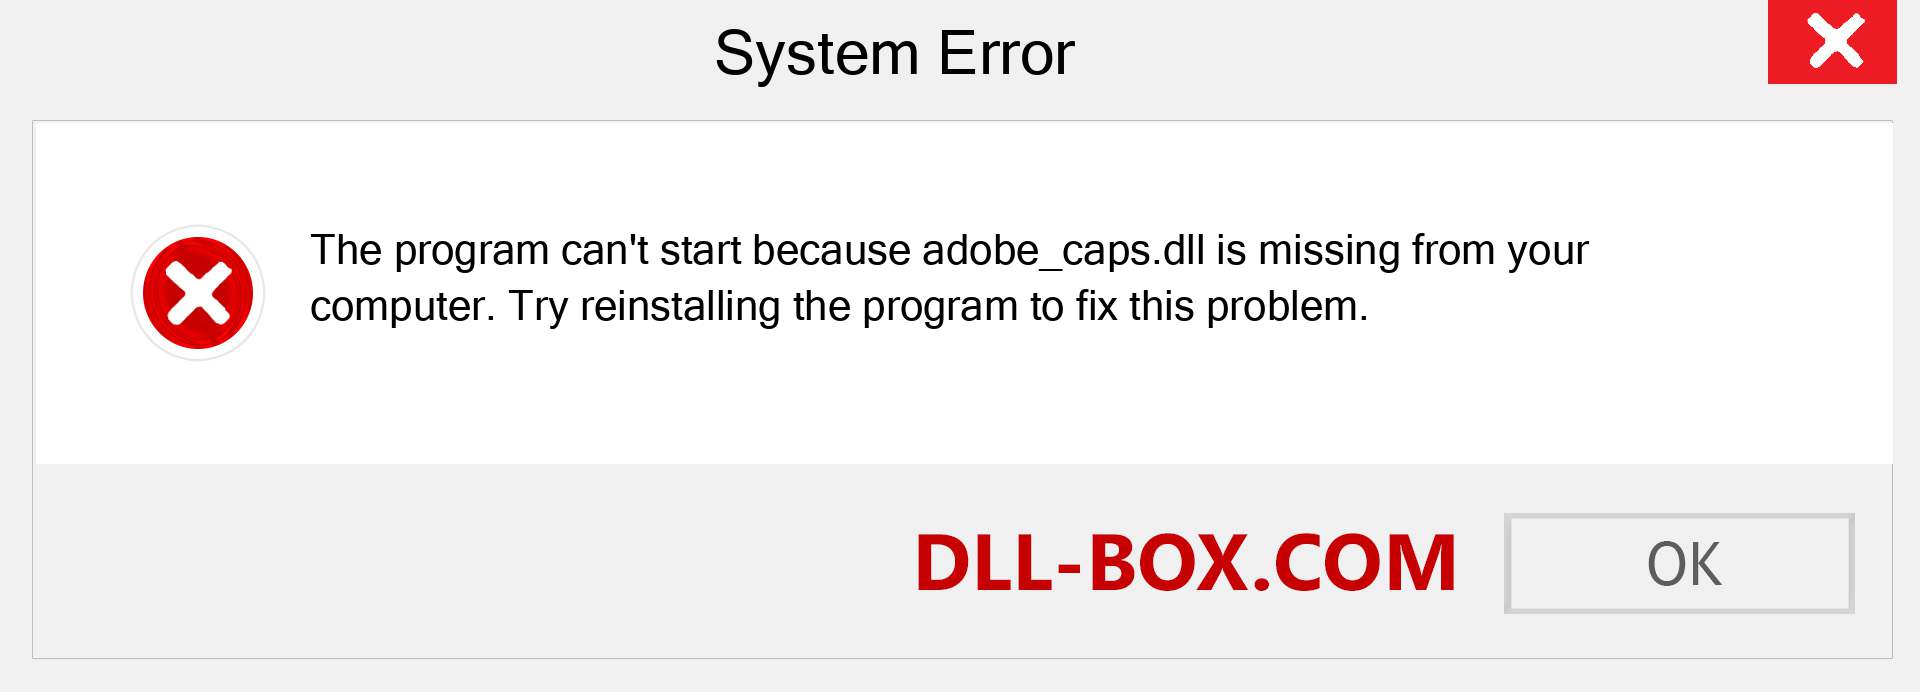  adobe_caps.dll file is missing?. Download for Windows 7, 8, 10 - Fix  adobe_caps dll Missing Error on Windows, photos, images